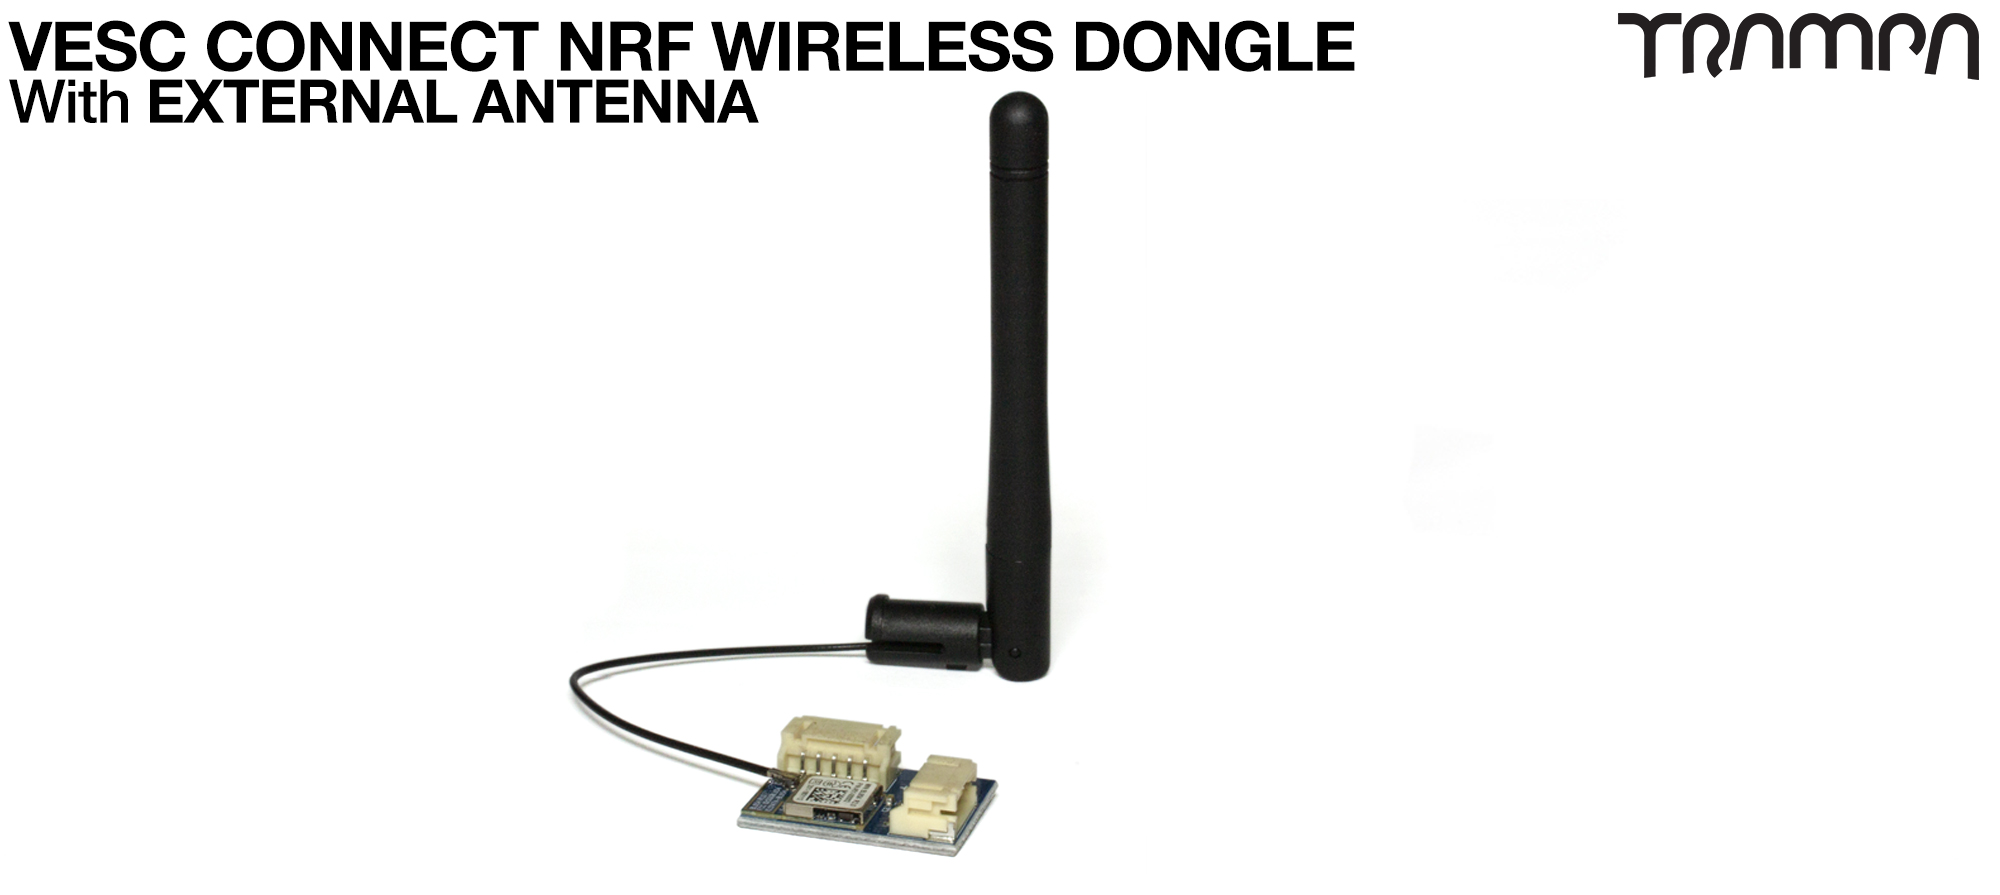 4x NRF Dongle with EXTERNAL DIPOLE Antenna (+£120)